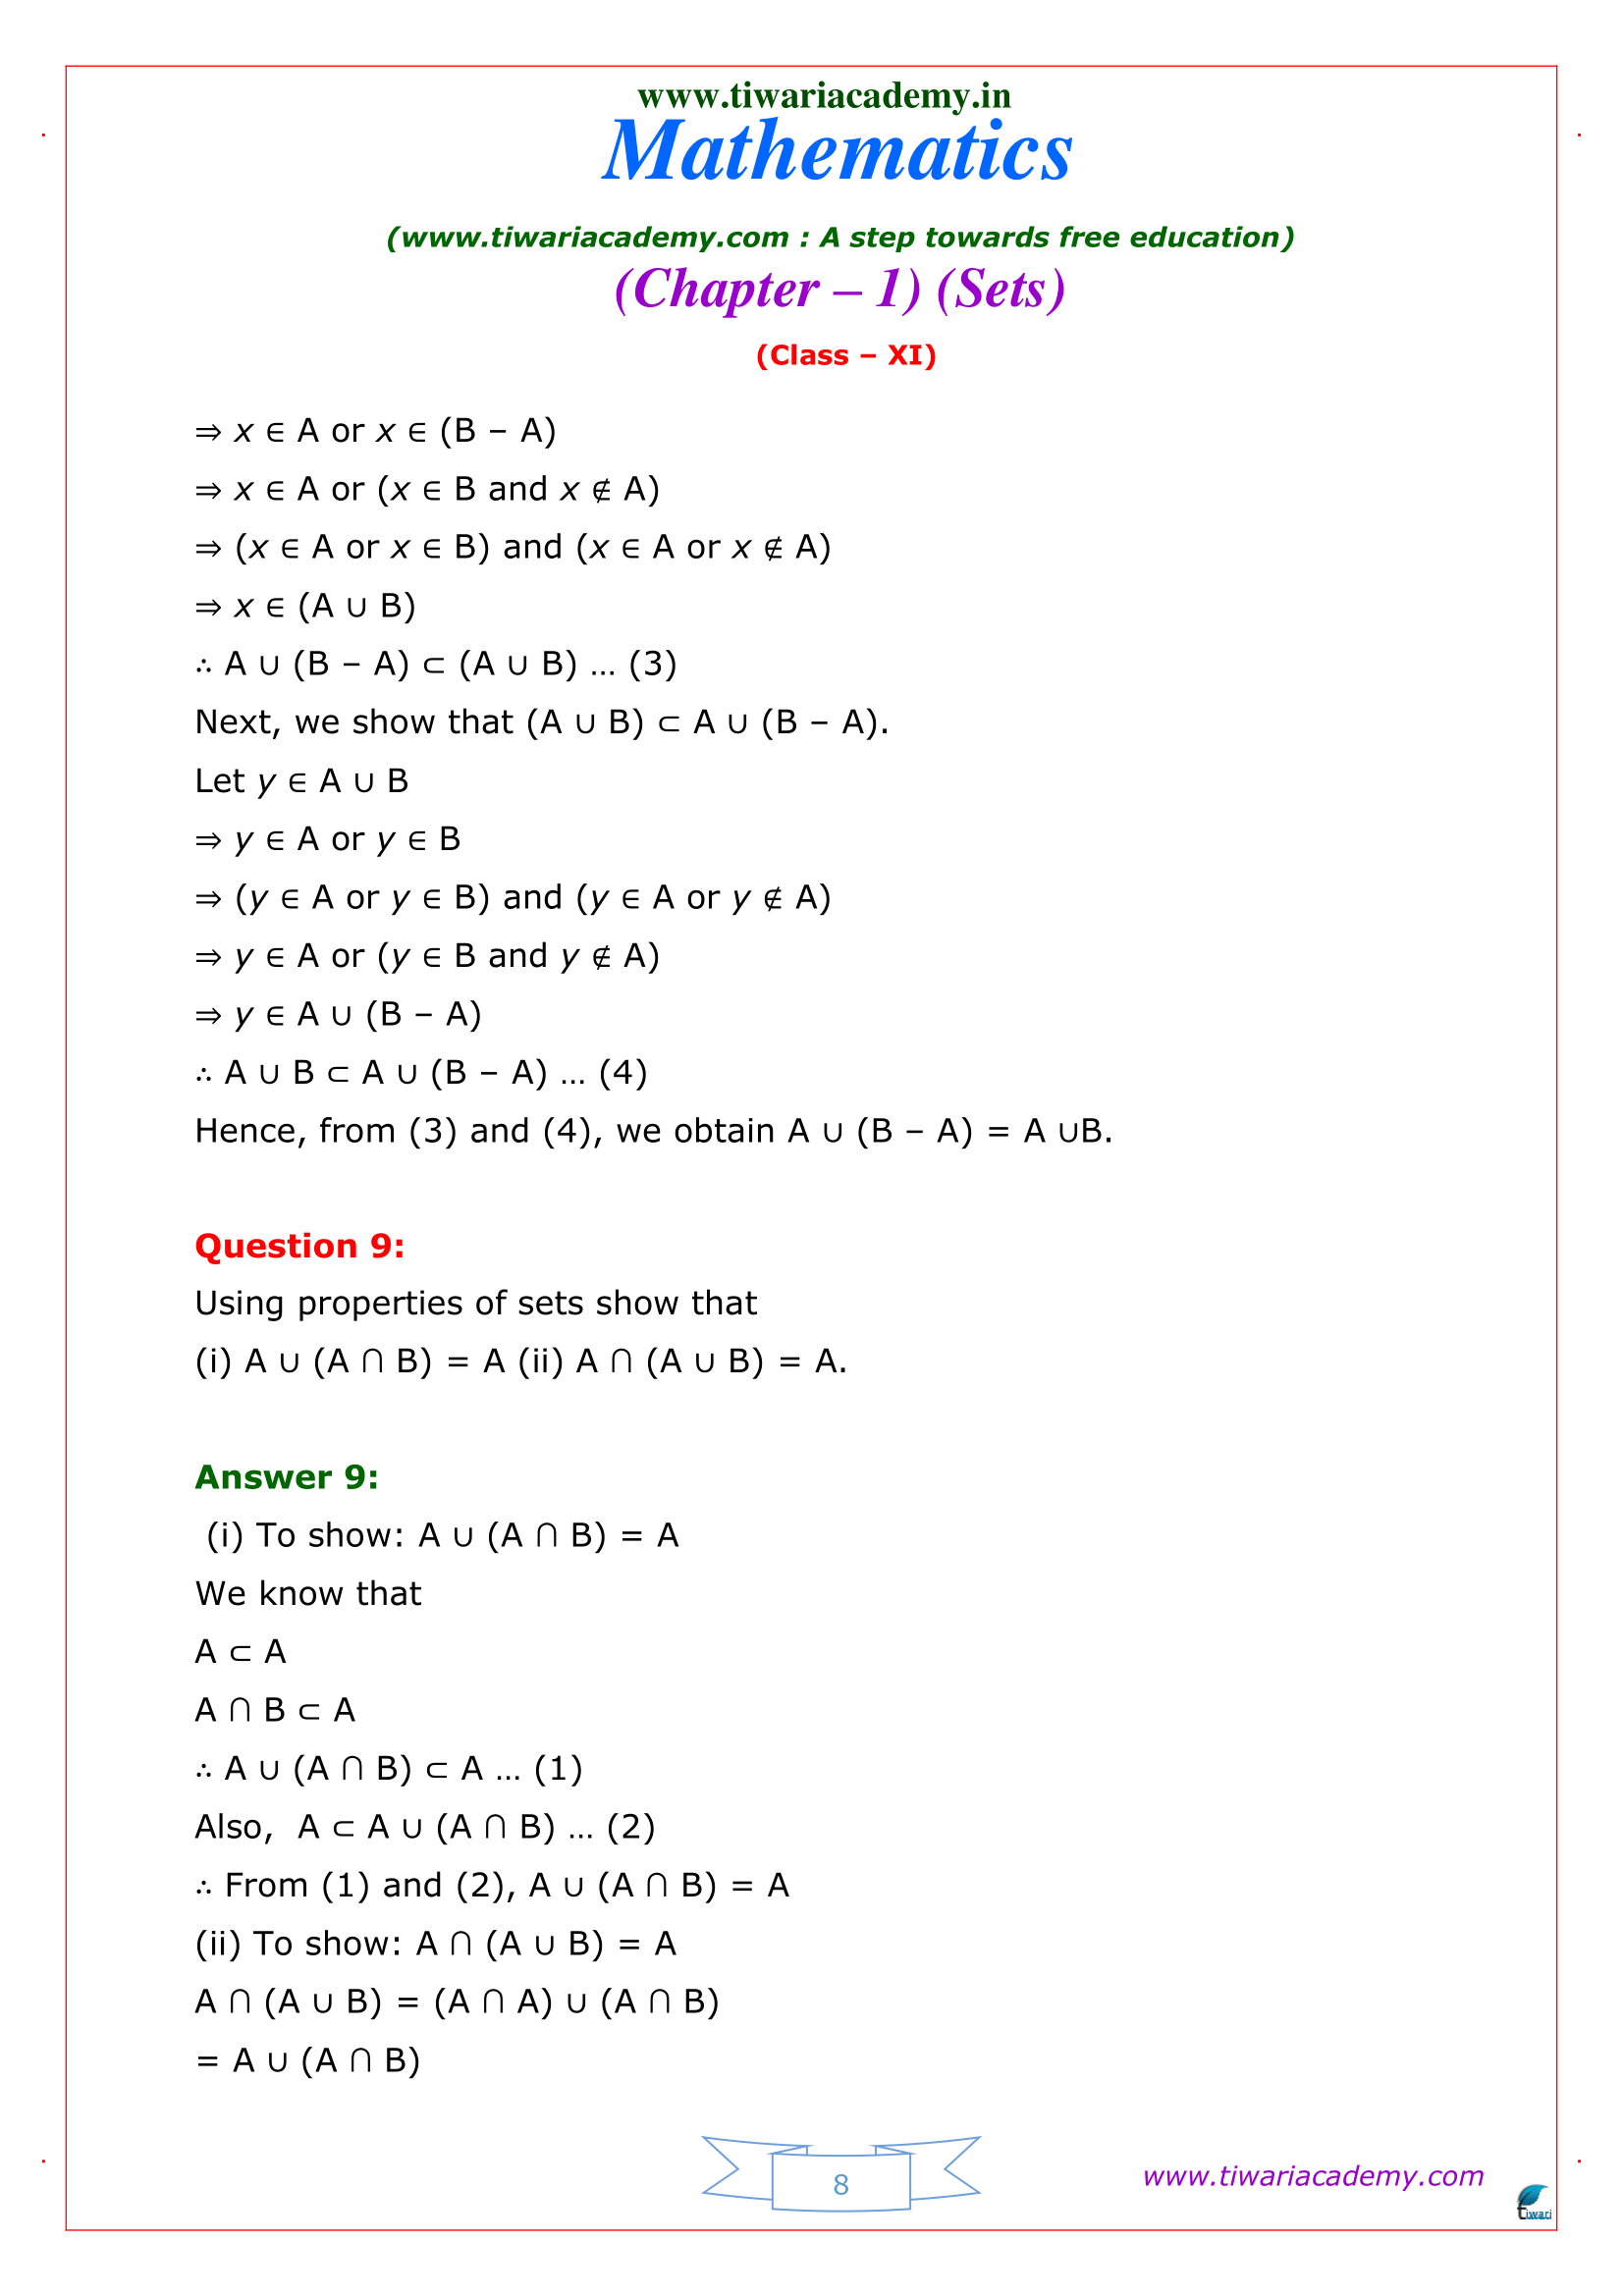 11 Maths misc. of chapter 1 sols